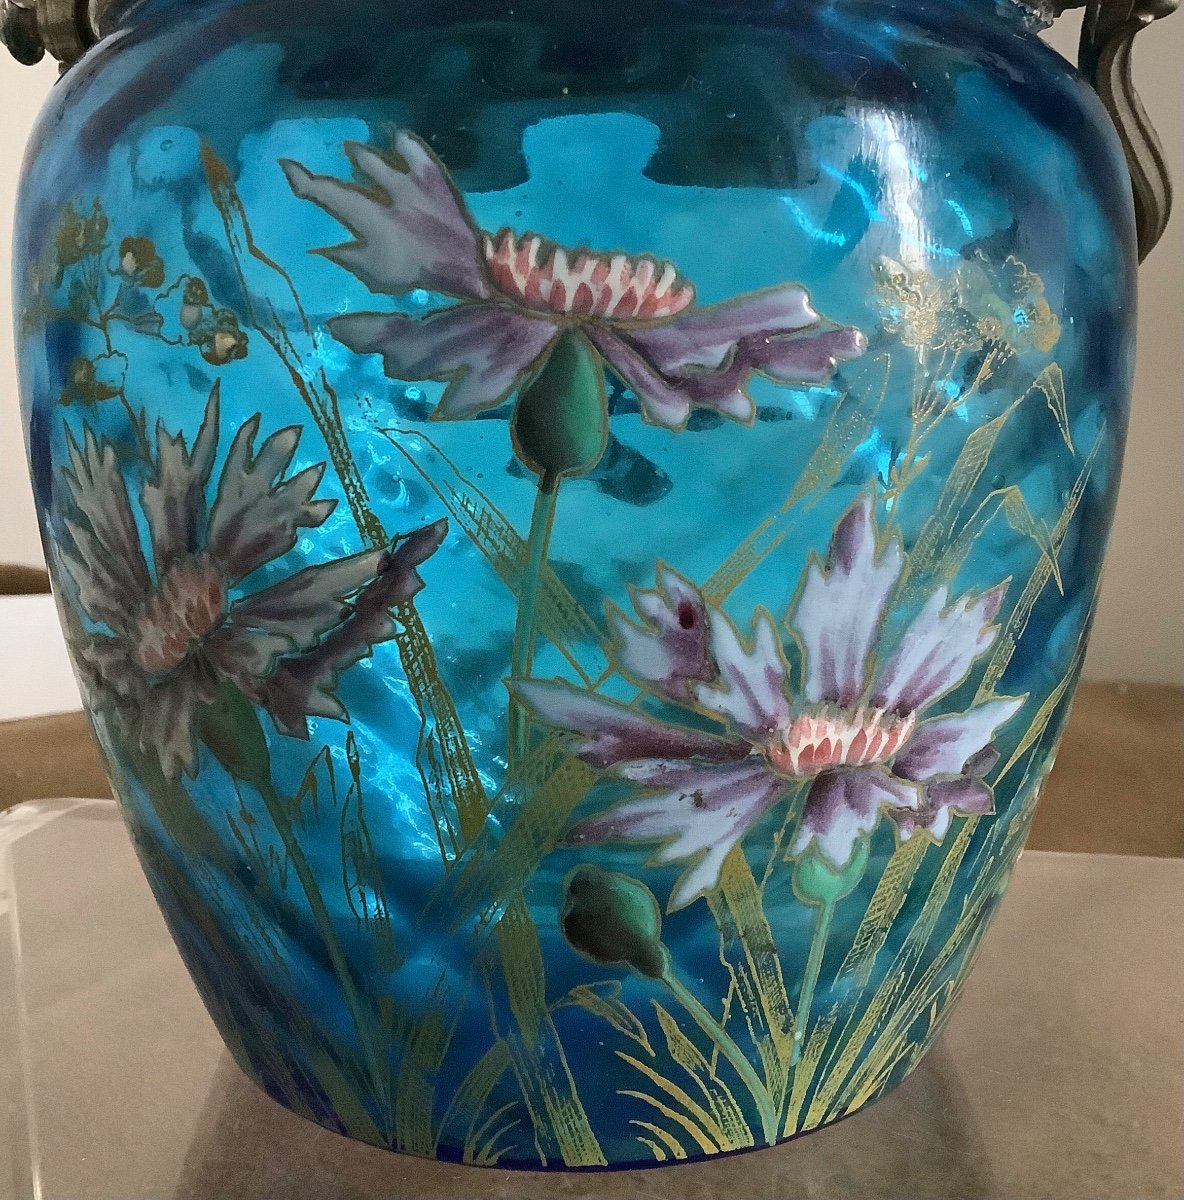 An Enameled Glass Candy Box Decorated With Flowers On A Blue Background, 1900s Period-photo-2